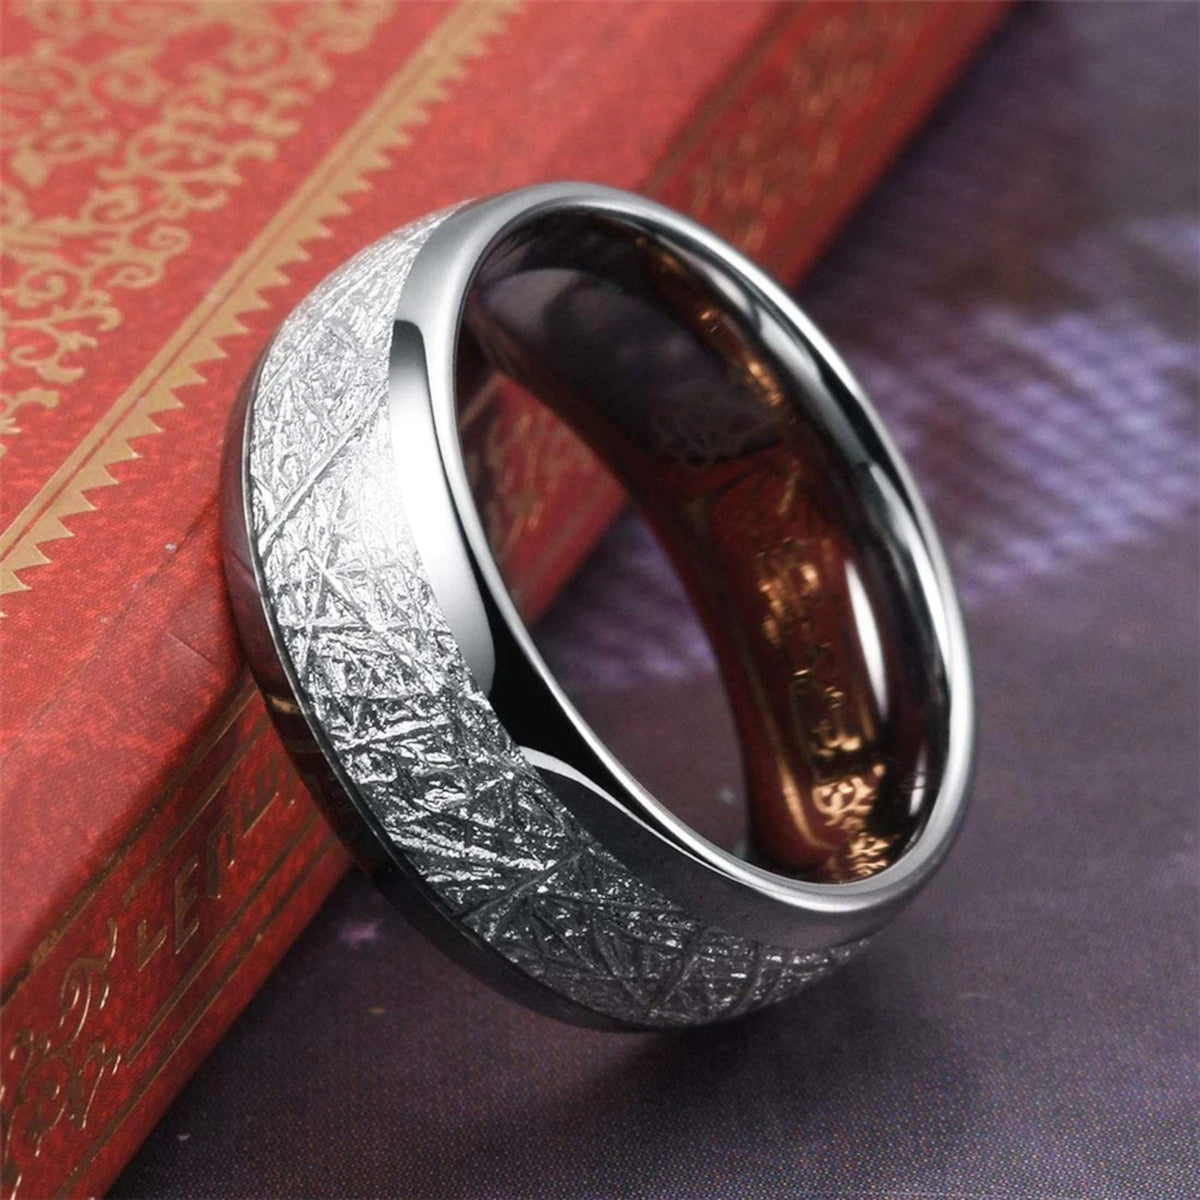 Silver Frosted meteorite Dome Ring, Polished stainless steel silver ring frosted meteorite inlay.